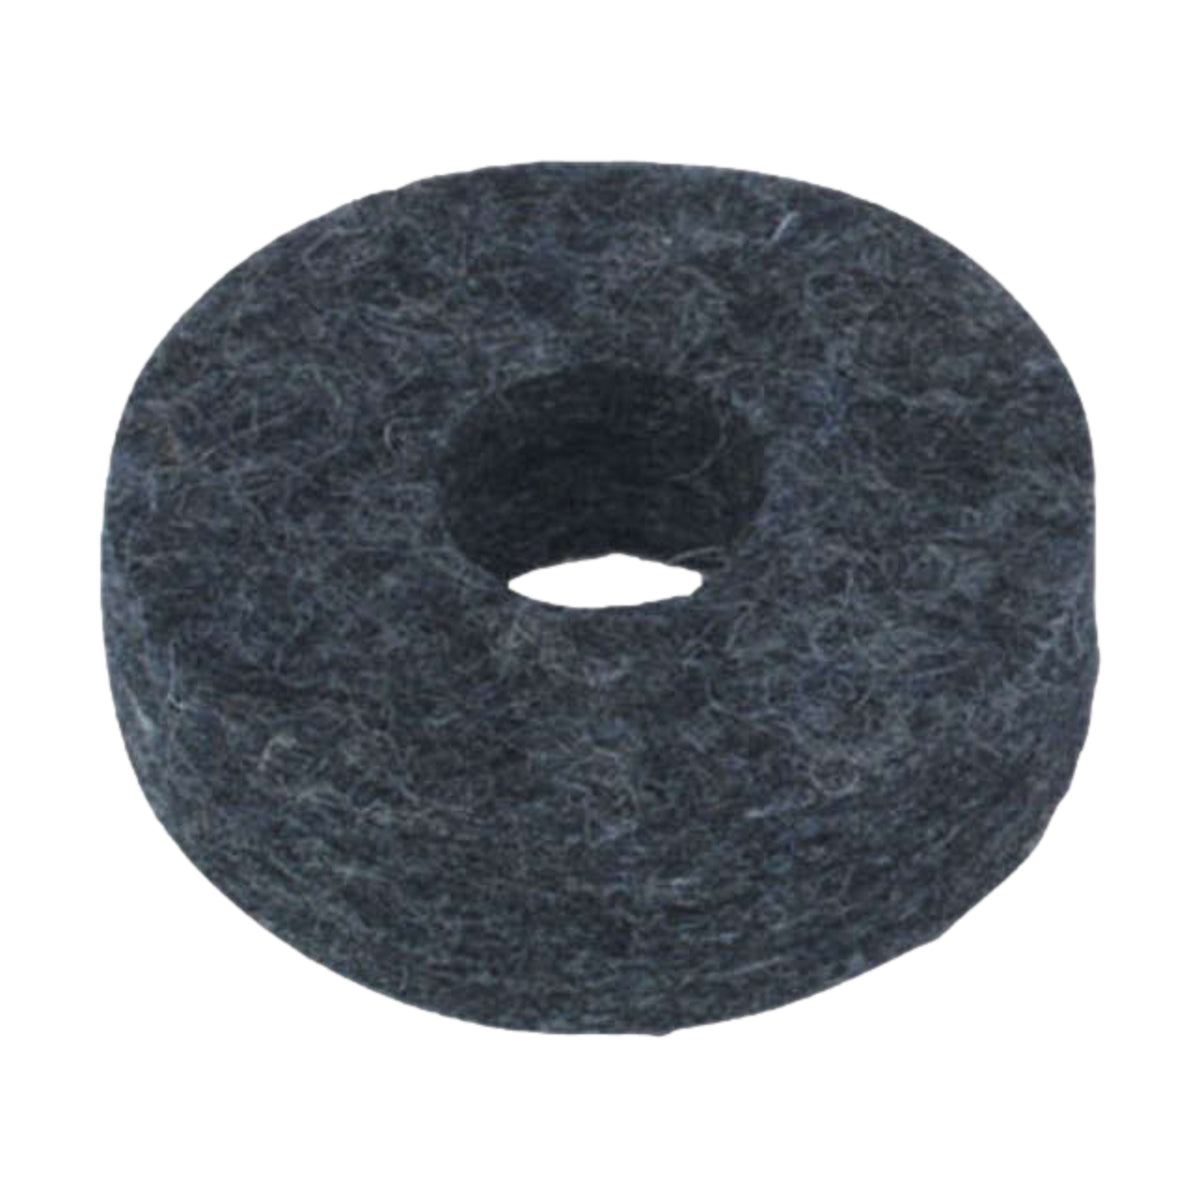 30mm Washer Felt for Cymbal Stand